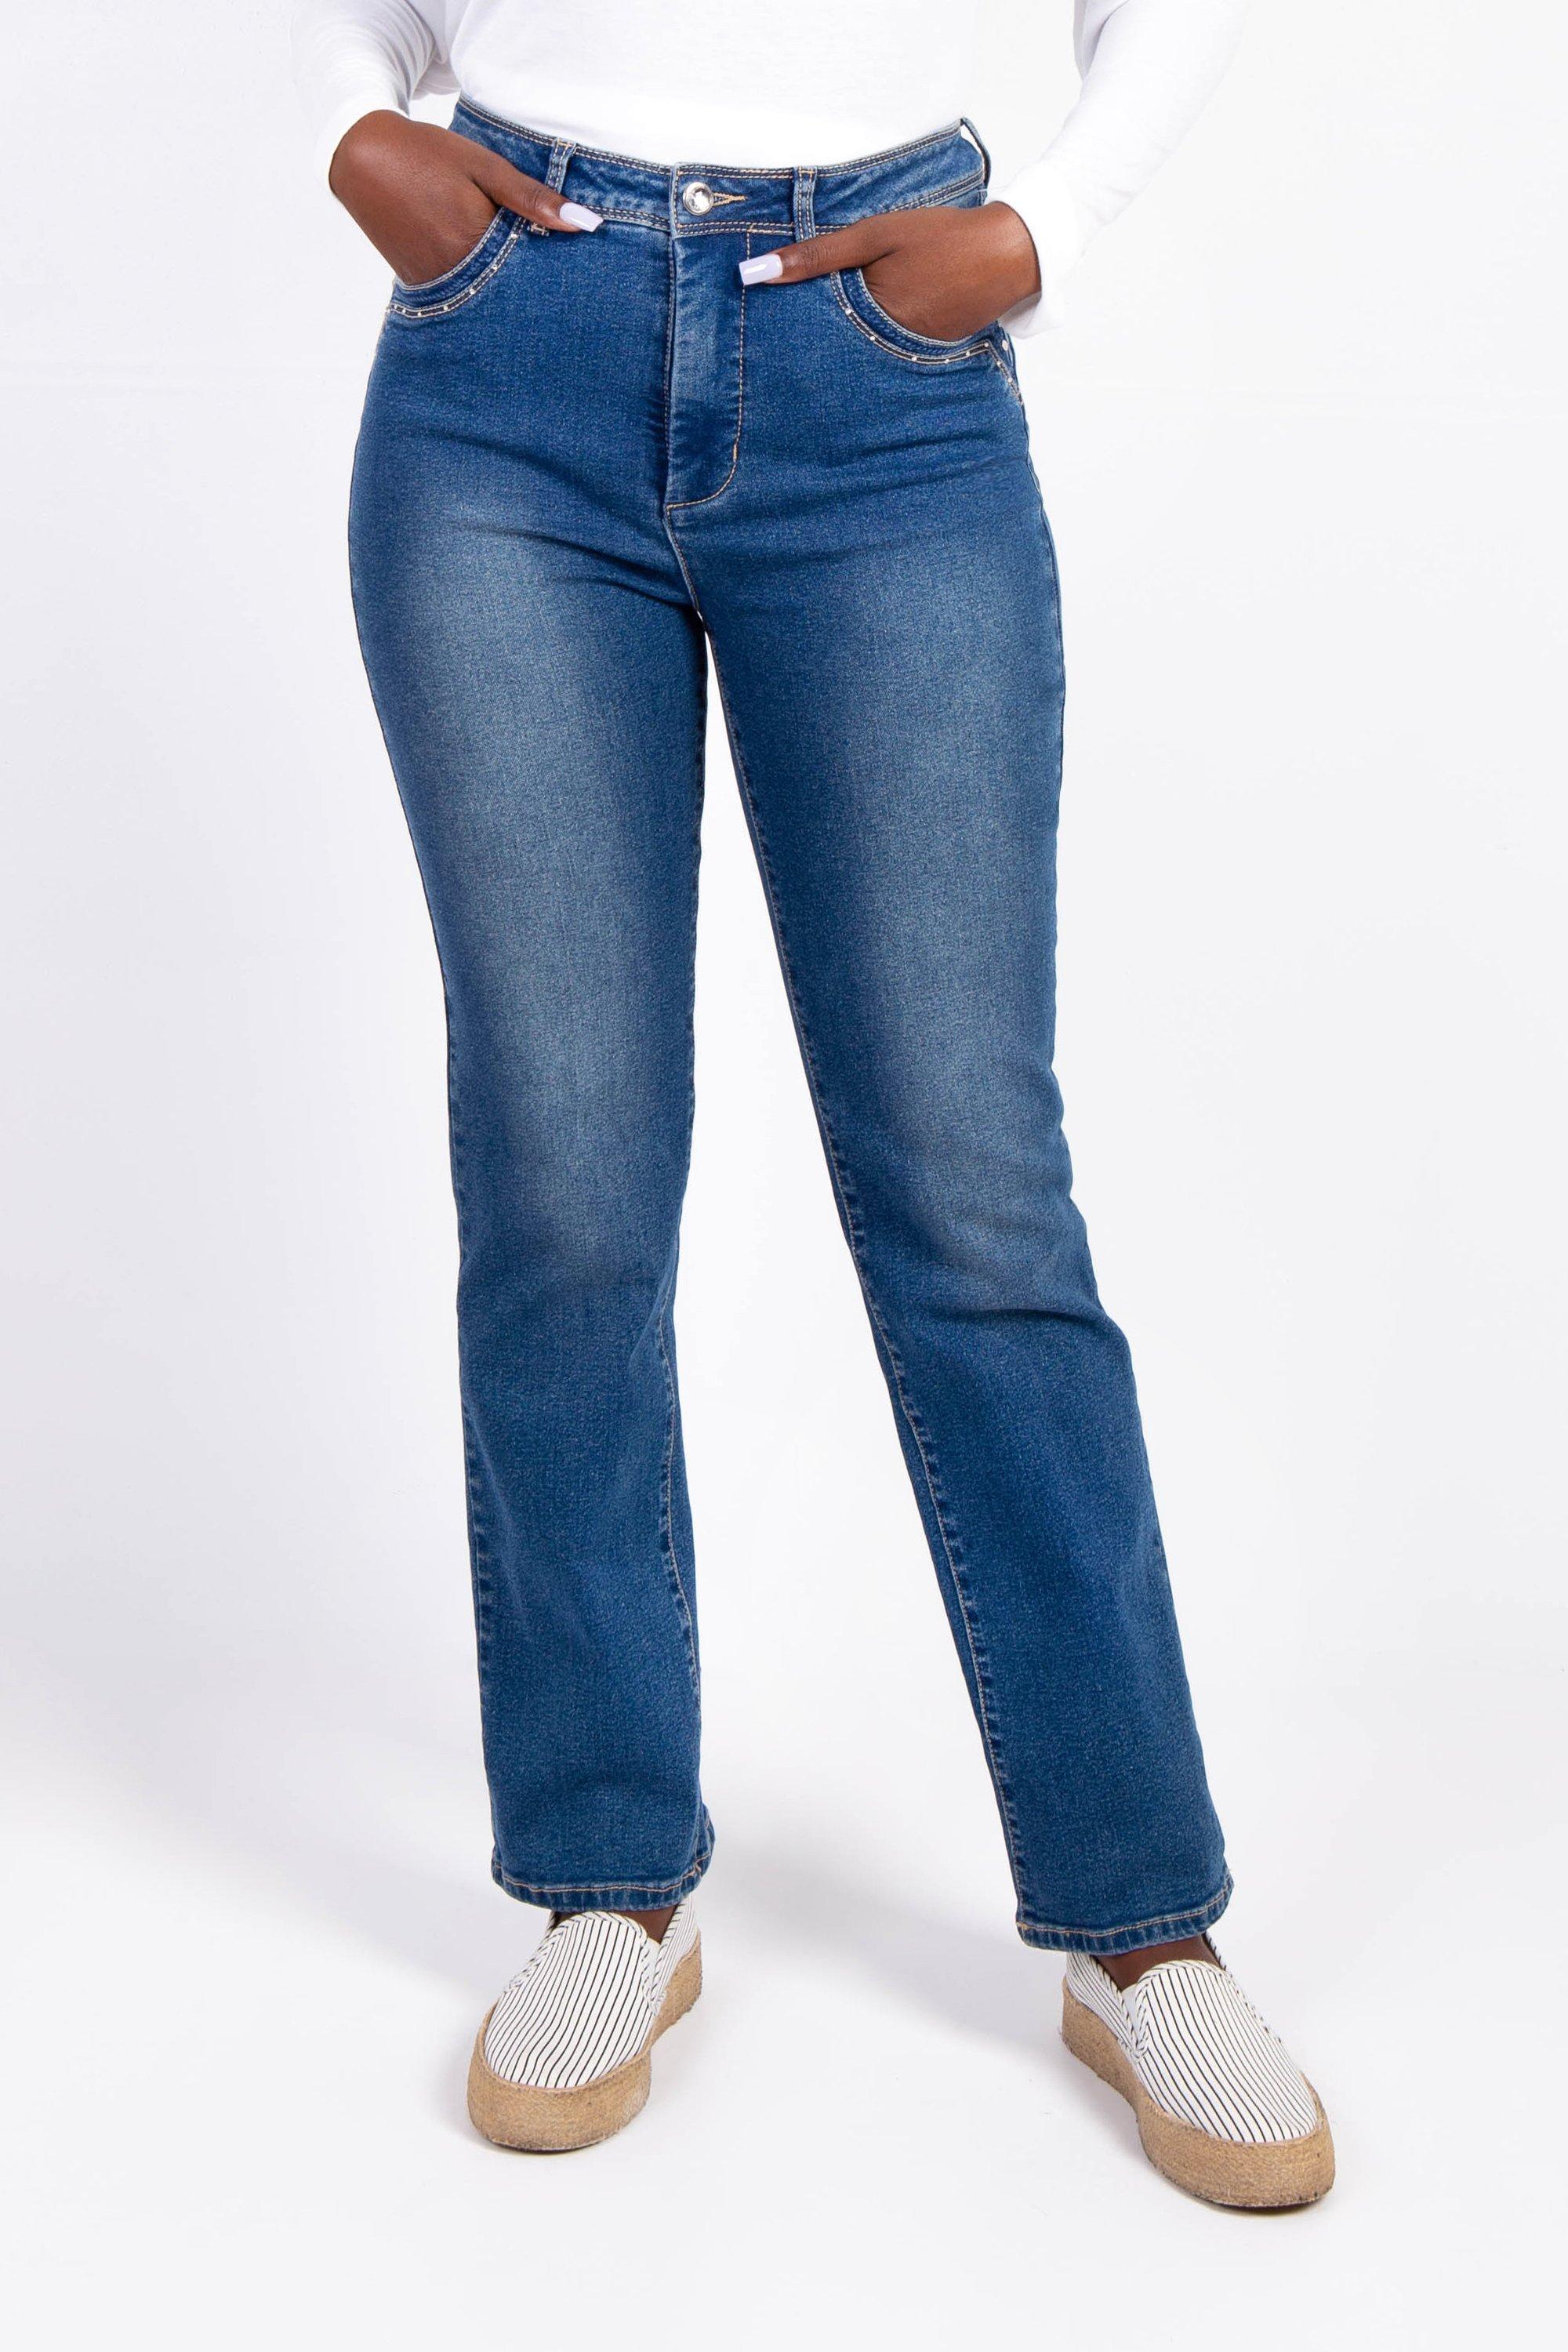 Miladys - If you were looking for another reason to buy a pair of our  WonderFit denims, here it is View More WonderFit Here